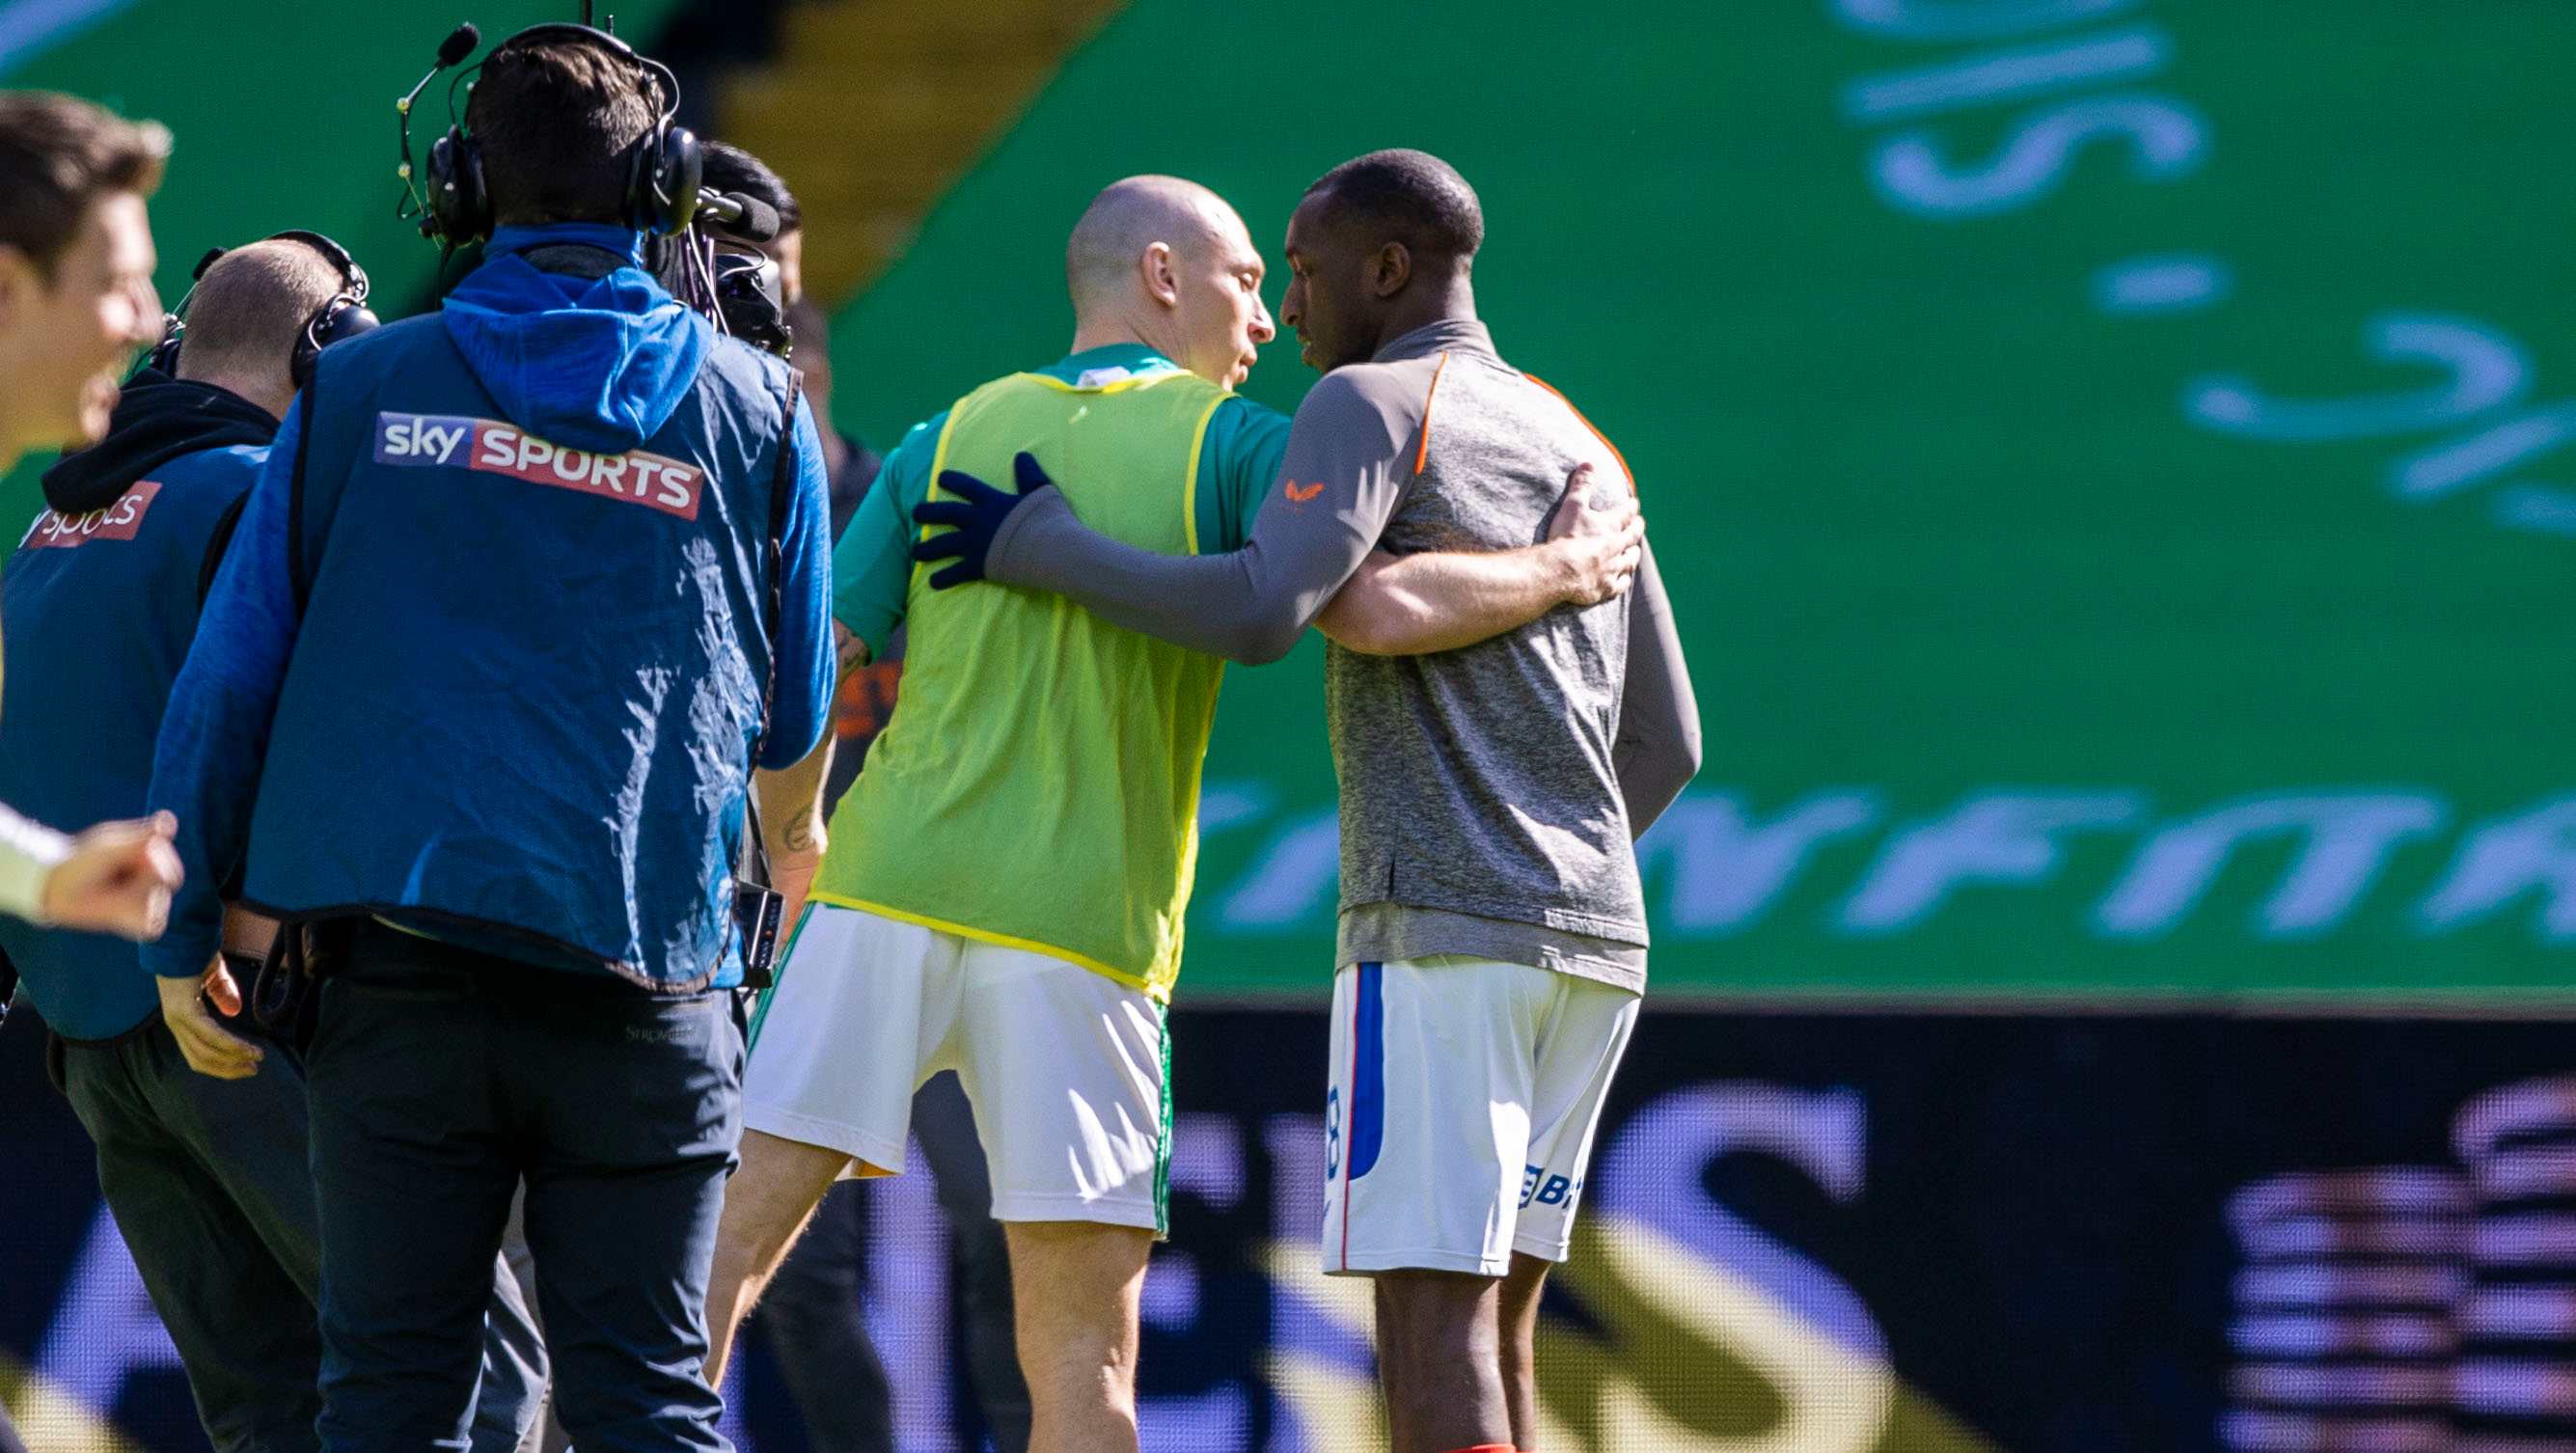 GLASGOW, SCOTLAND - MARCH 21: Celtic captain Scott Brown (left) embraces Rangers' Glen Kamara pre match during the Scottish Premiership match between Celtic and Rangers at Celtic Park, on March 21, 2021, in Glasgow, Scotland. (Photo by Craig Williamson / SNS Group)